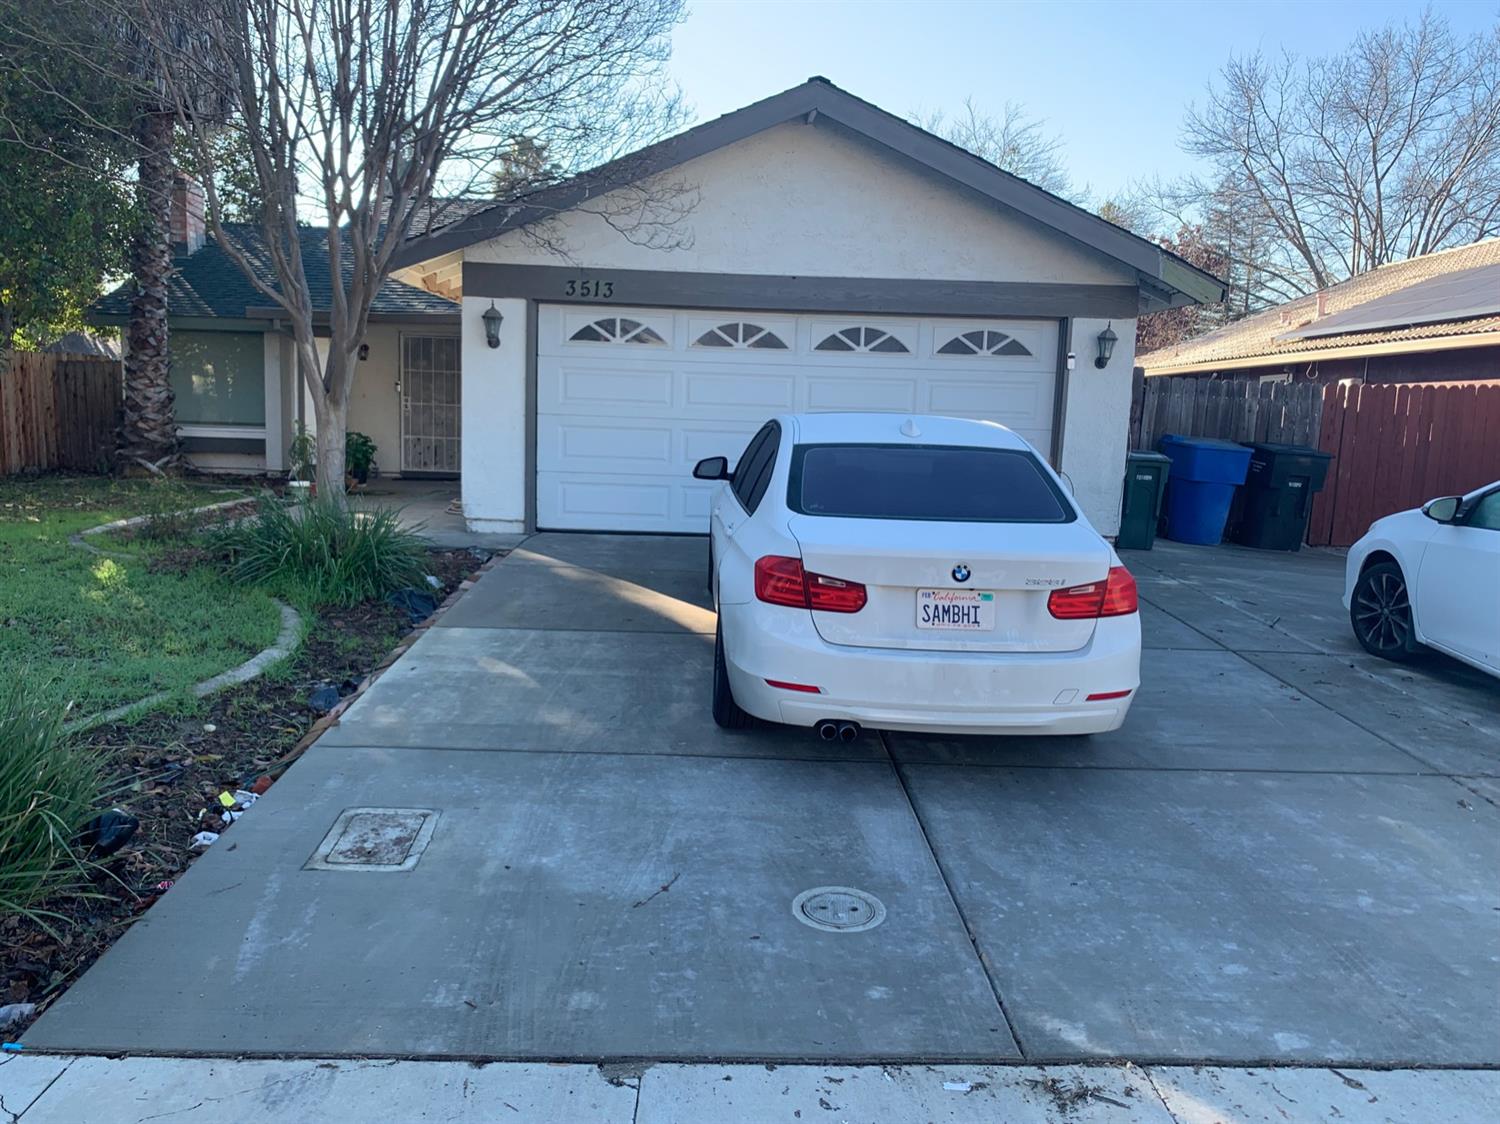 Great opportunity in a well-established neighborhood in Natomas! 3bd/2ba home conveniently located n